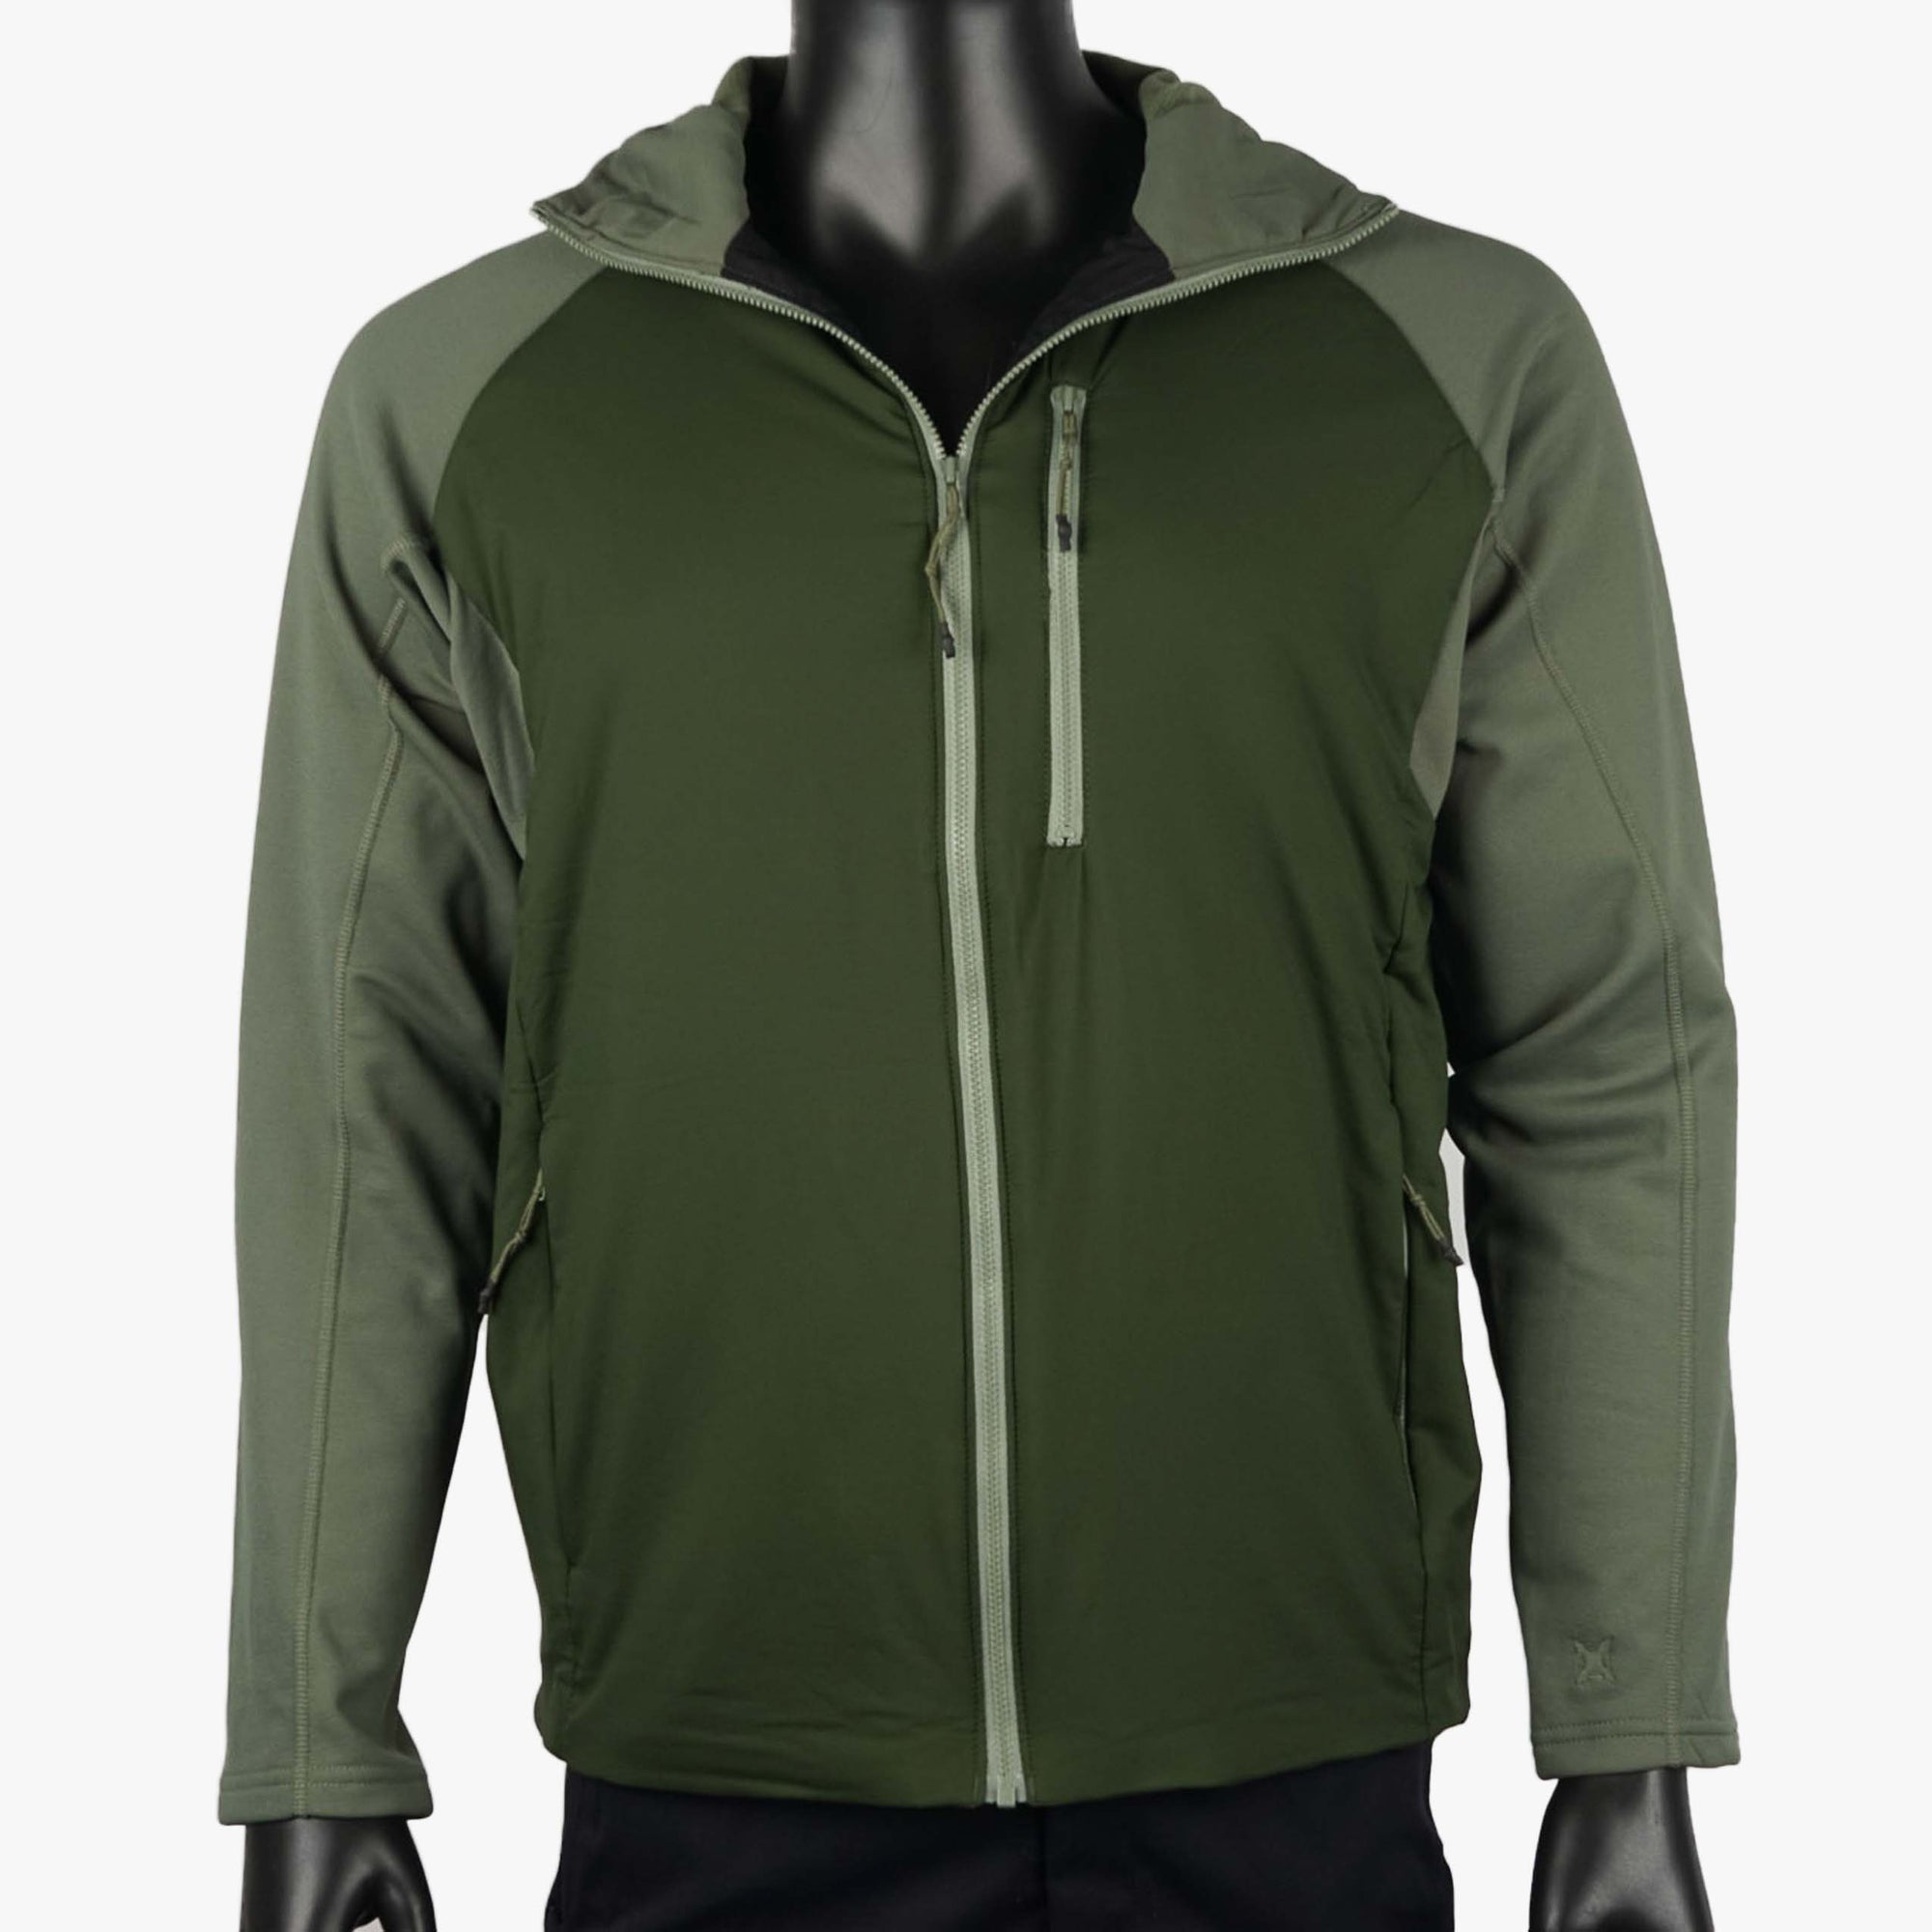 Image of Vertx Hooded Jacket. A great jacket for tactical training or casual wear. 